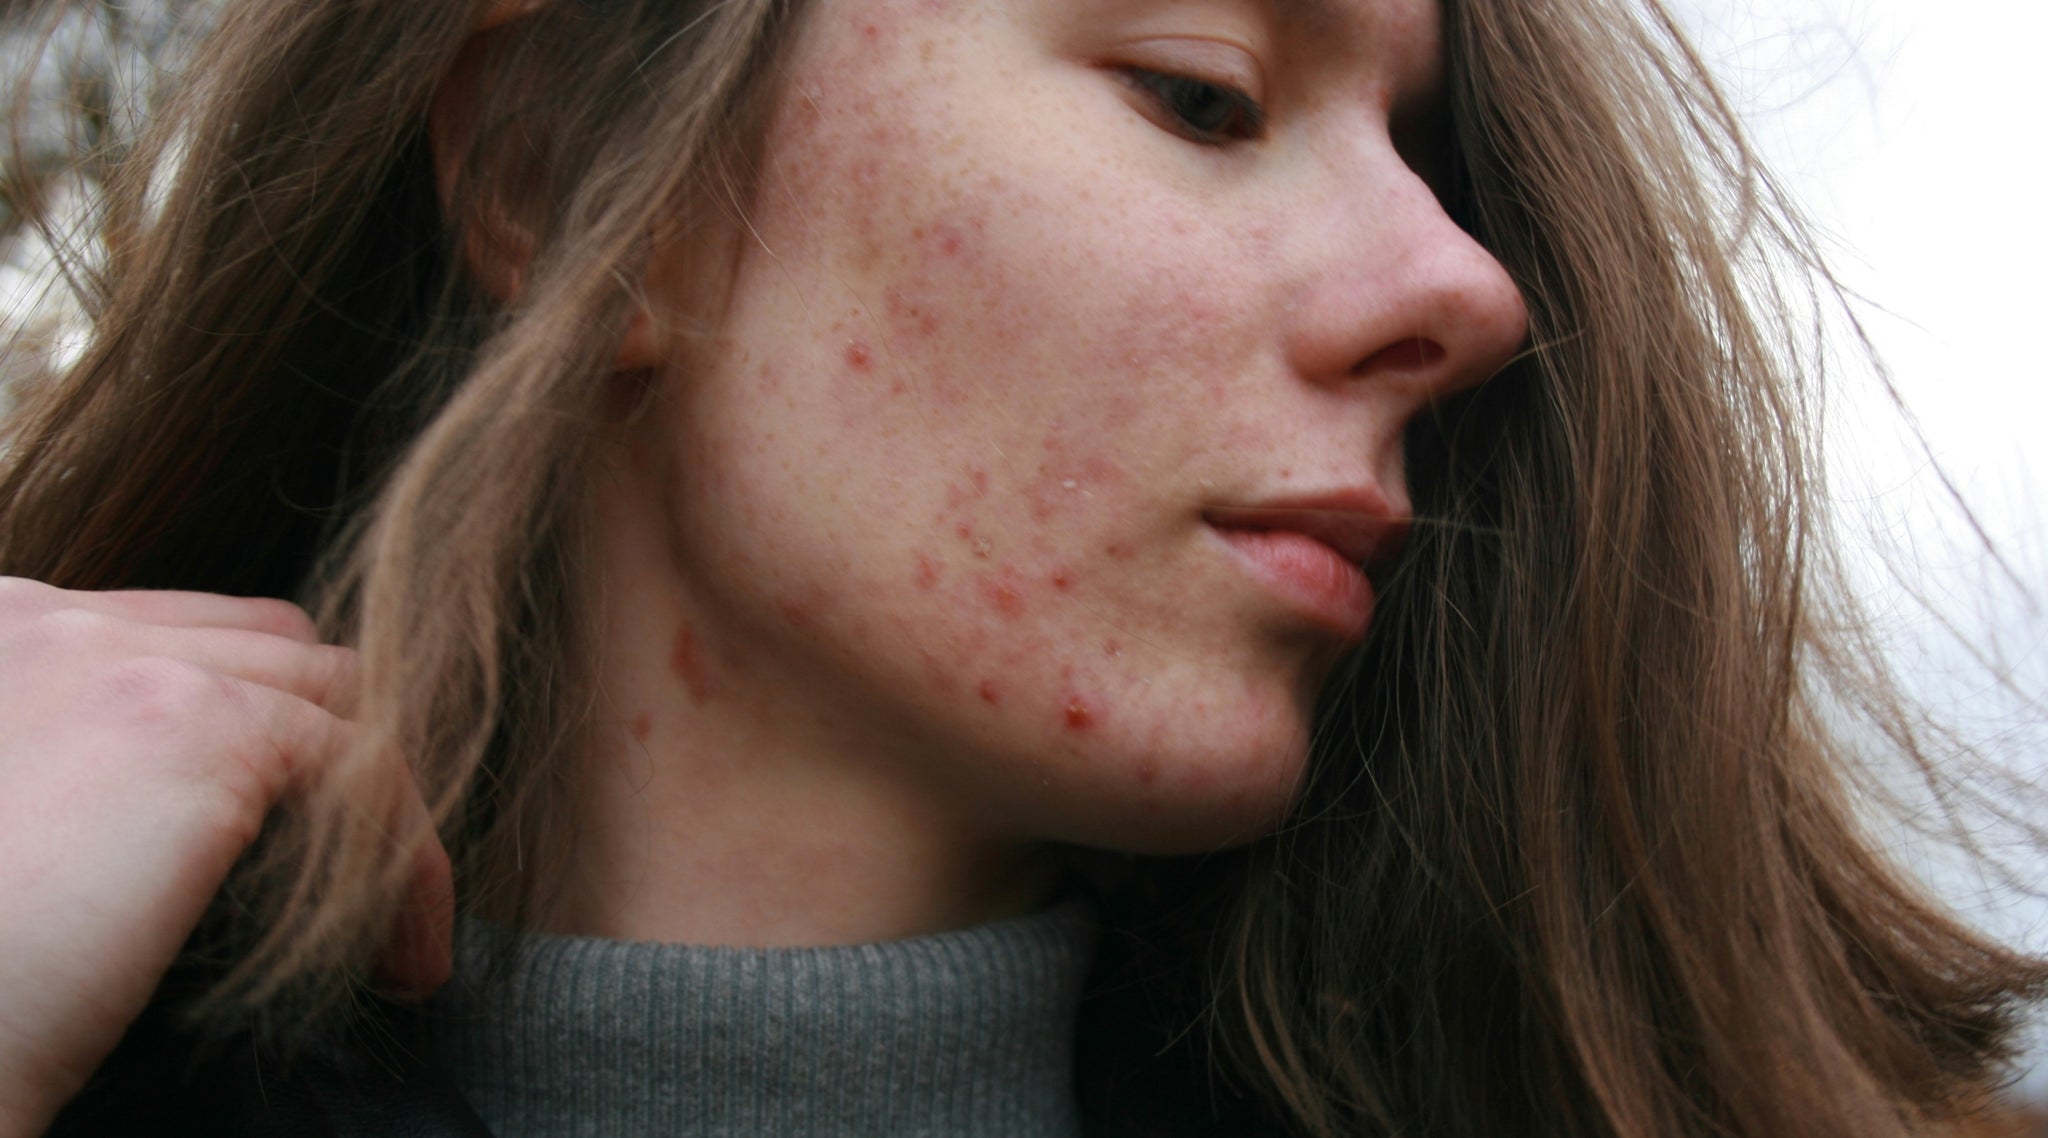 Treating acne safely and sustainably | A natural approach